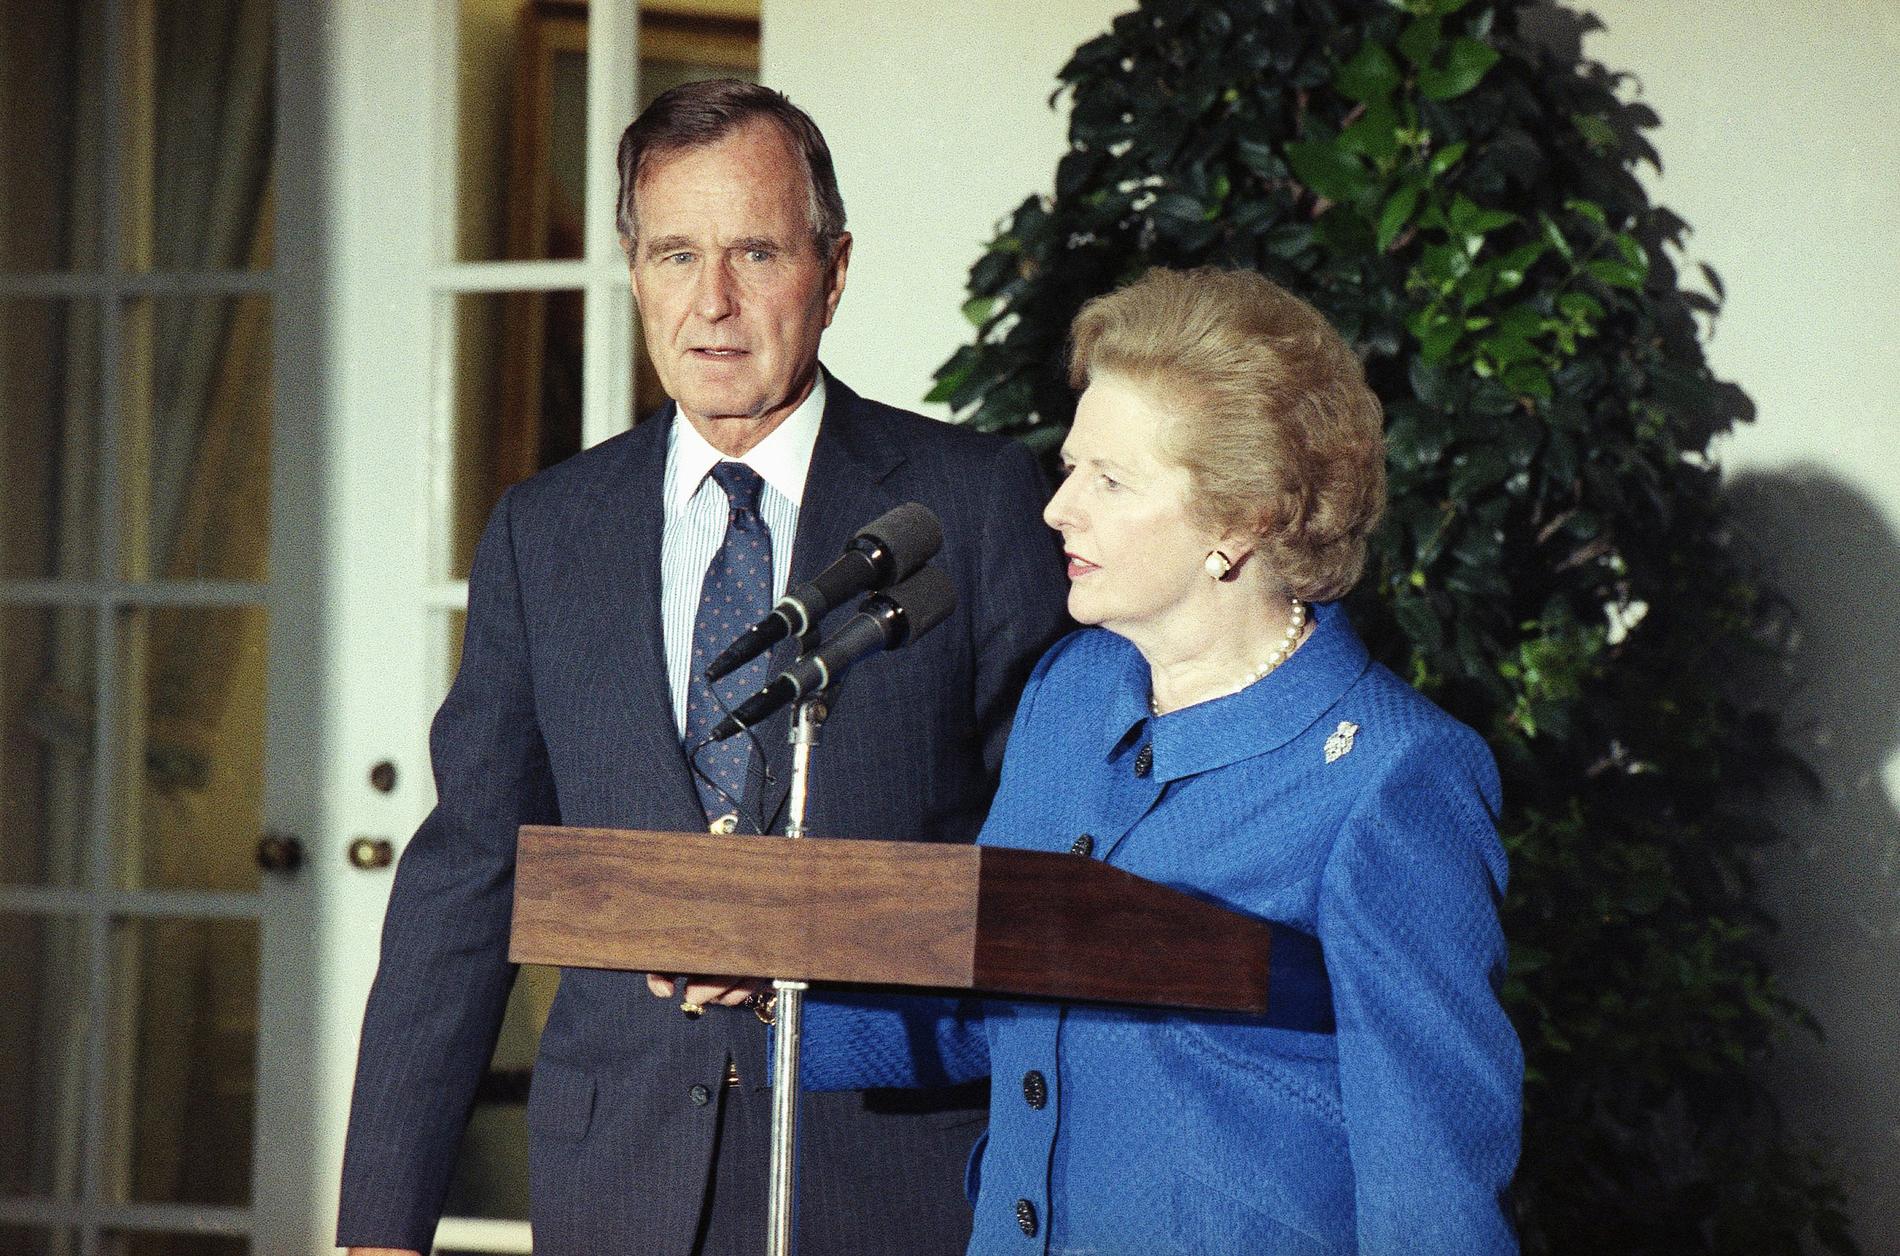 British Prime Minister Margaret Thatcher, with President Bush looking on, speaks to reporters, Monday, August 7, 1990 in Washington in the White House Rose Garden after an Oval Office meeting on the situation in the Persian Gulf. The United Nation Security Council voted 13-0 in favor of strict economic sanctions against Iraq.